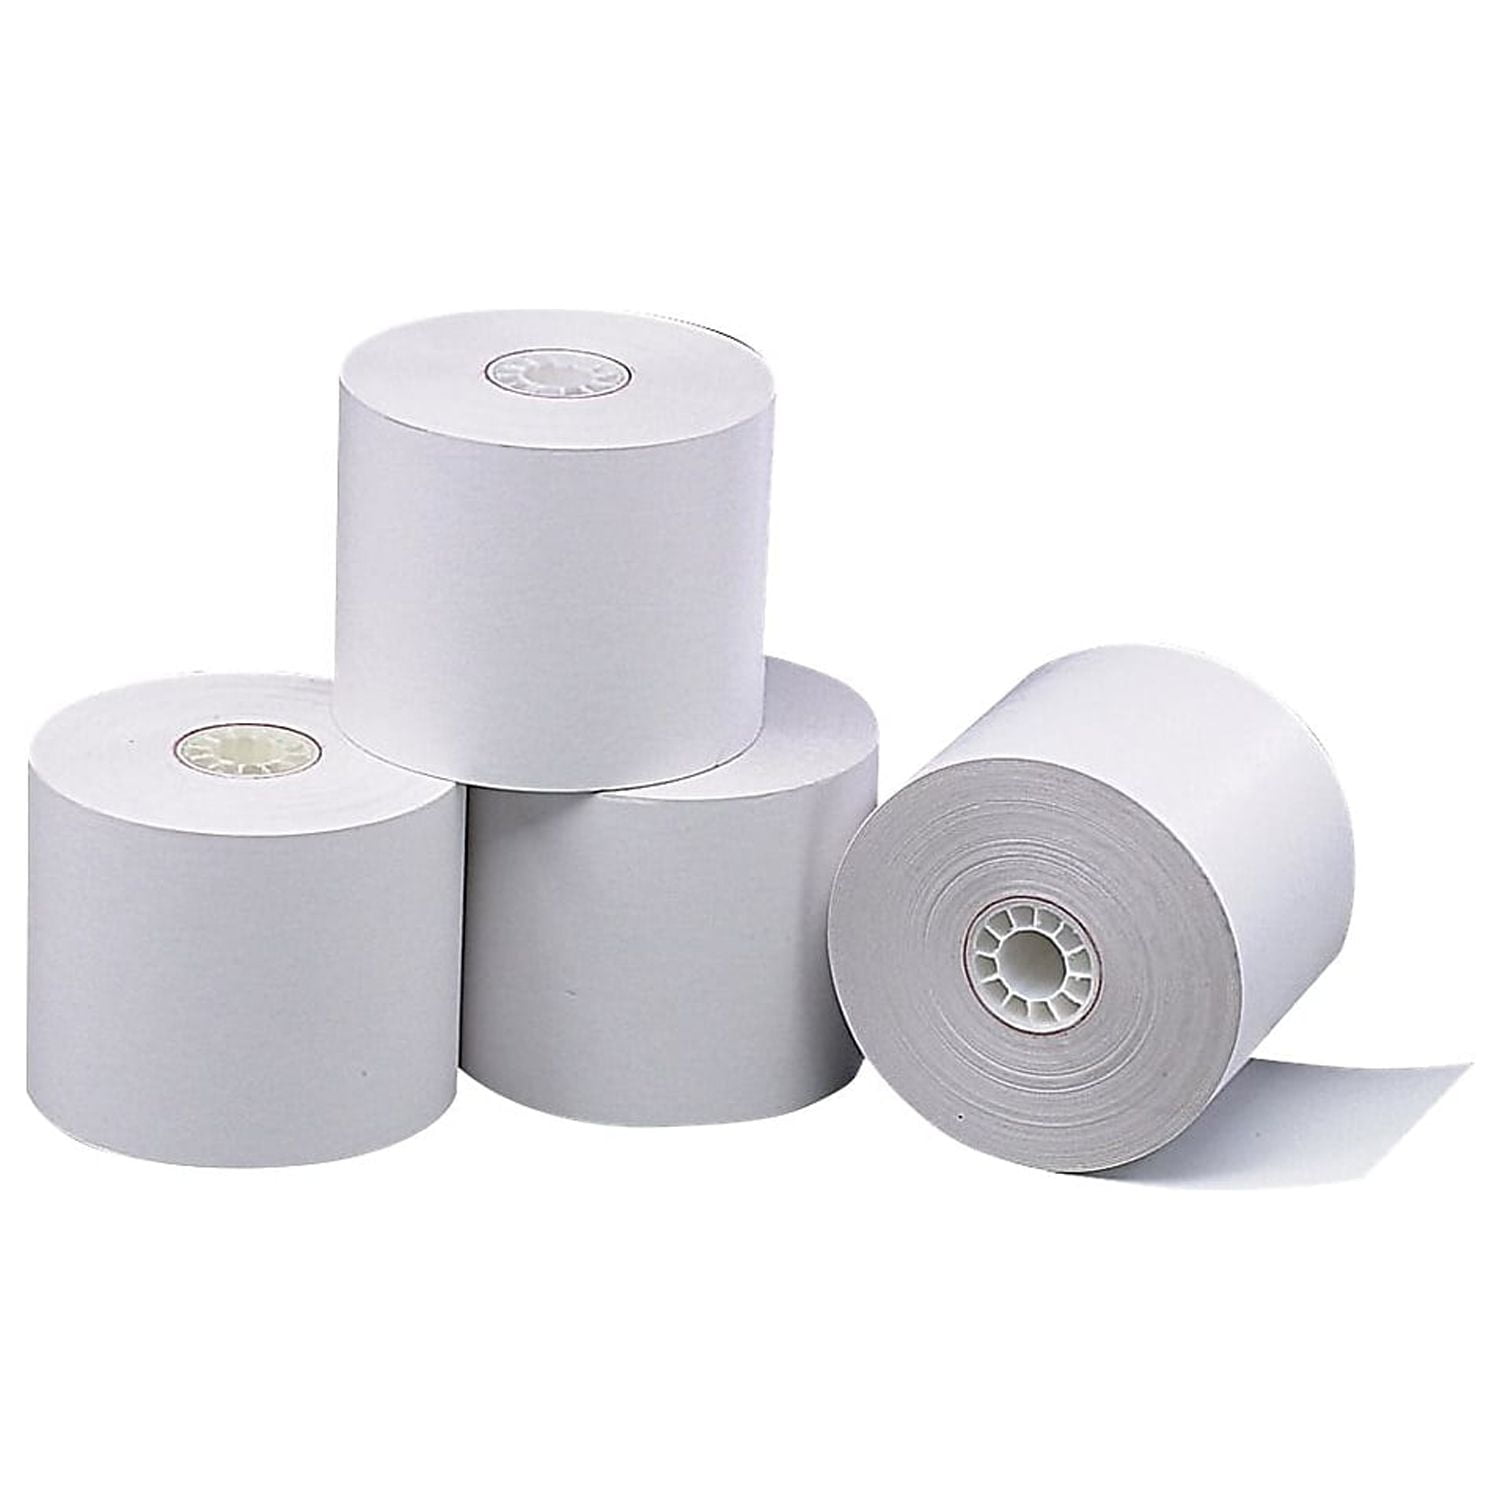 Cash Register Paper 3 1/8 x 200 Thermal Rolls 50 Pack Works With Star  Micronics TSP143IIIU USB Receipt Printer Paper Clover Station BPA Free From